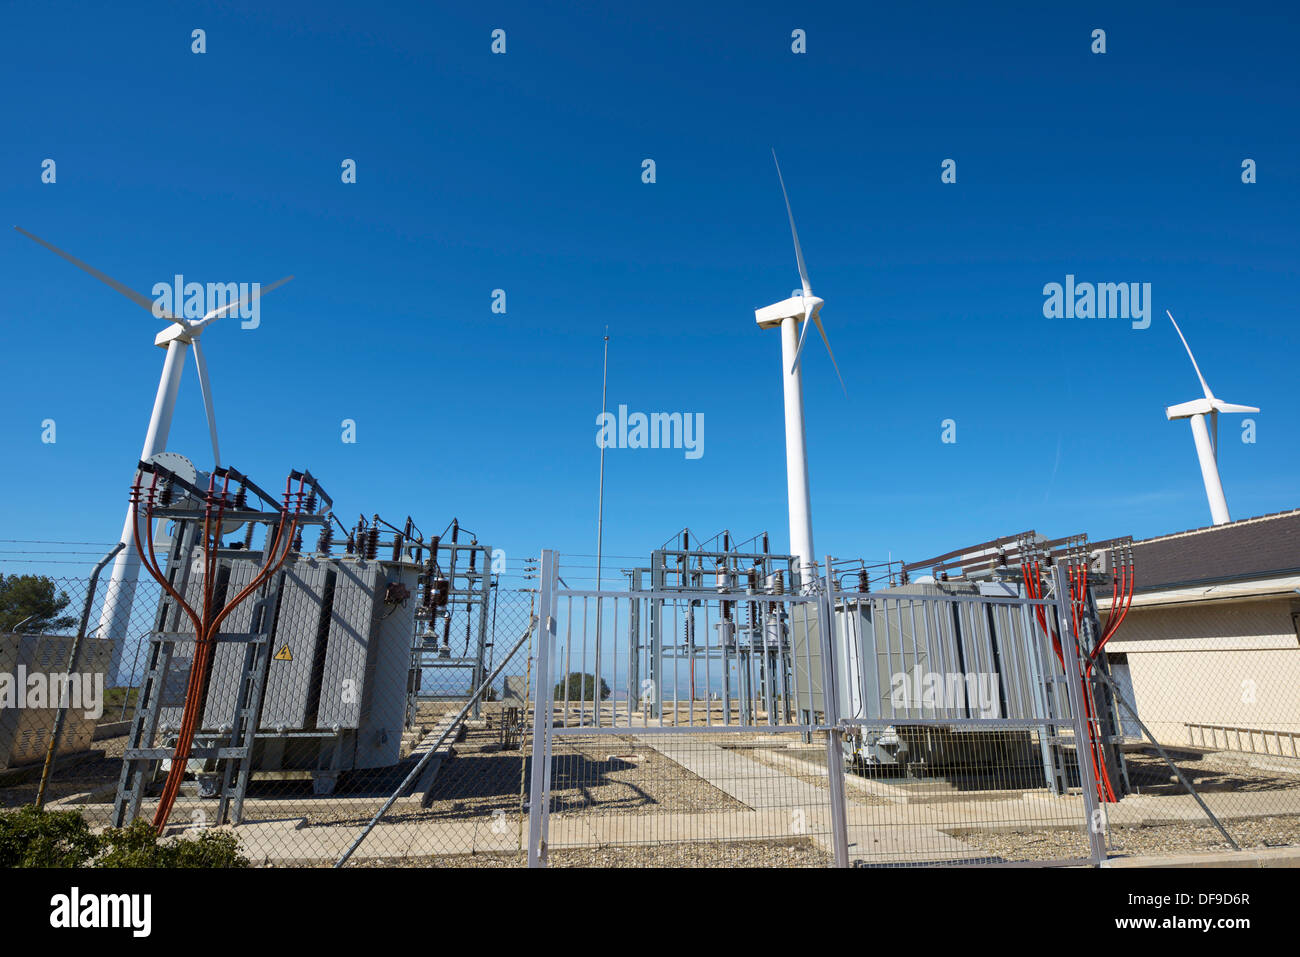 windmills for removable energy production and electrical substation, El Buste, Zaragoza, Aragon, Spain Stock Photo